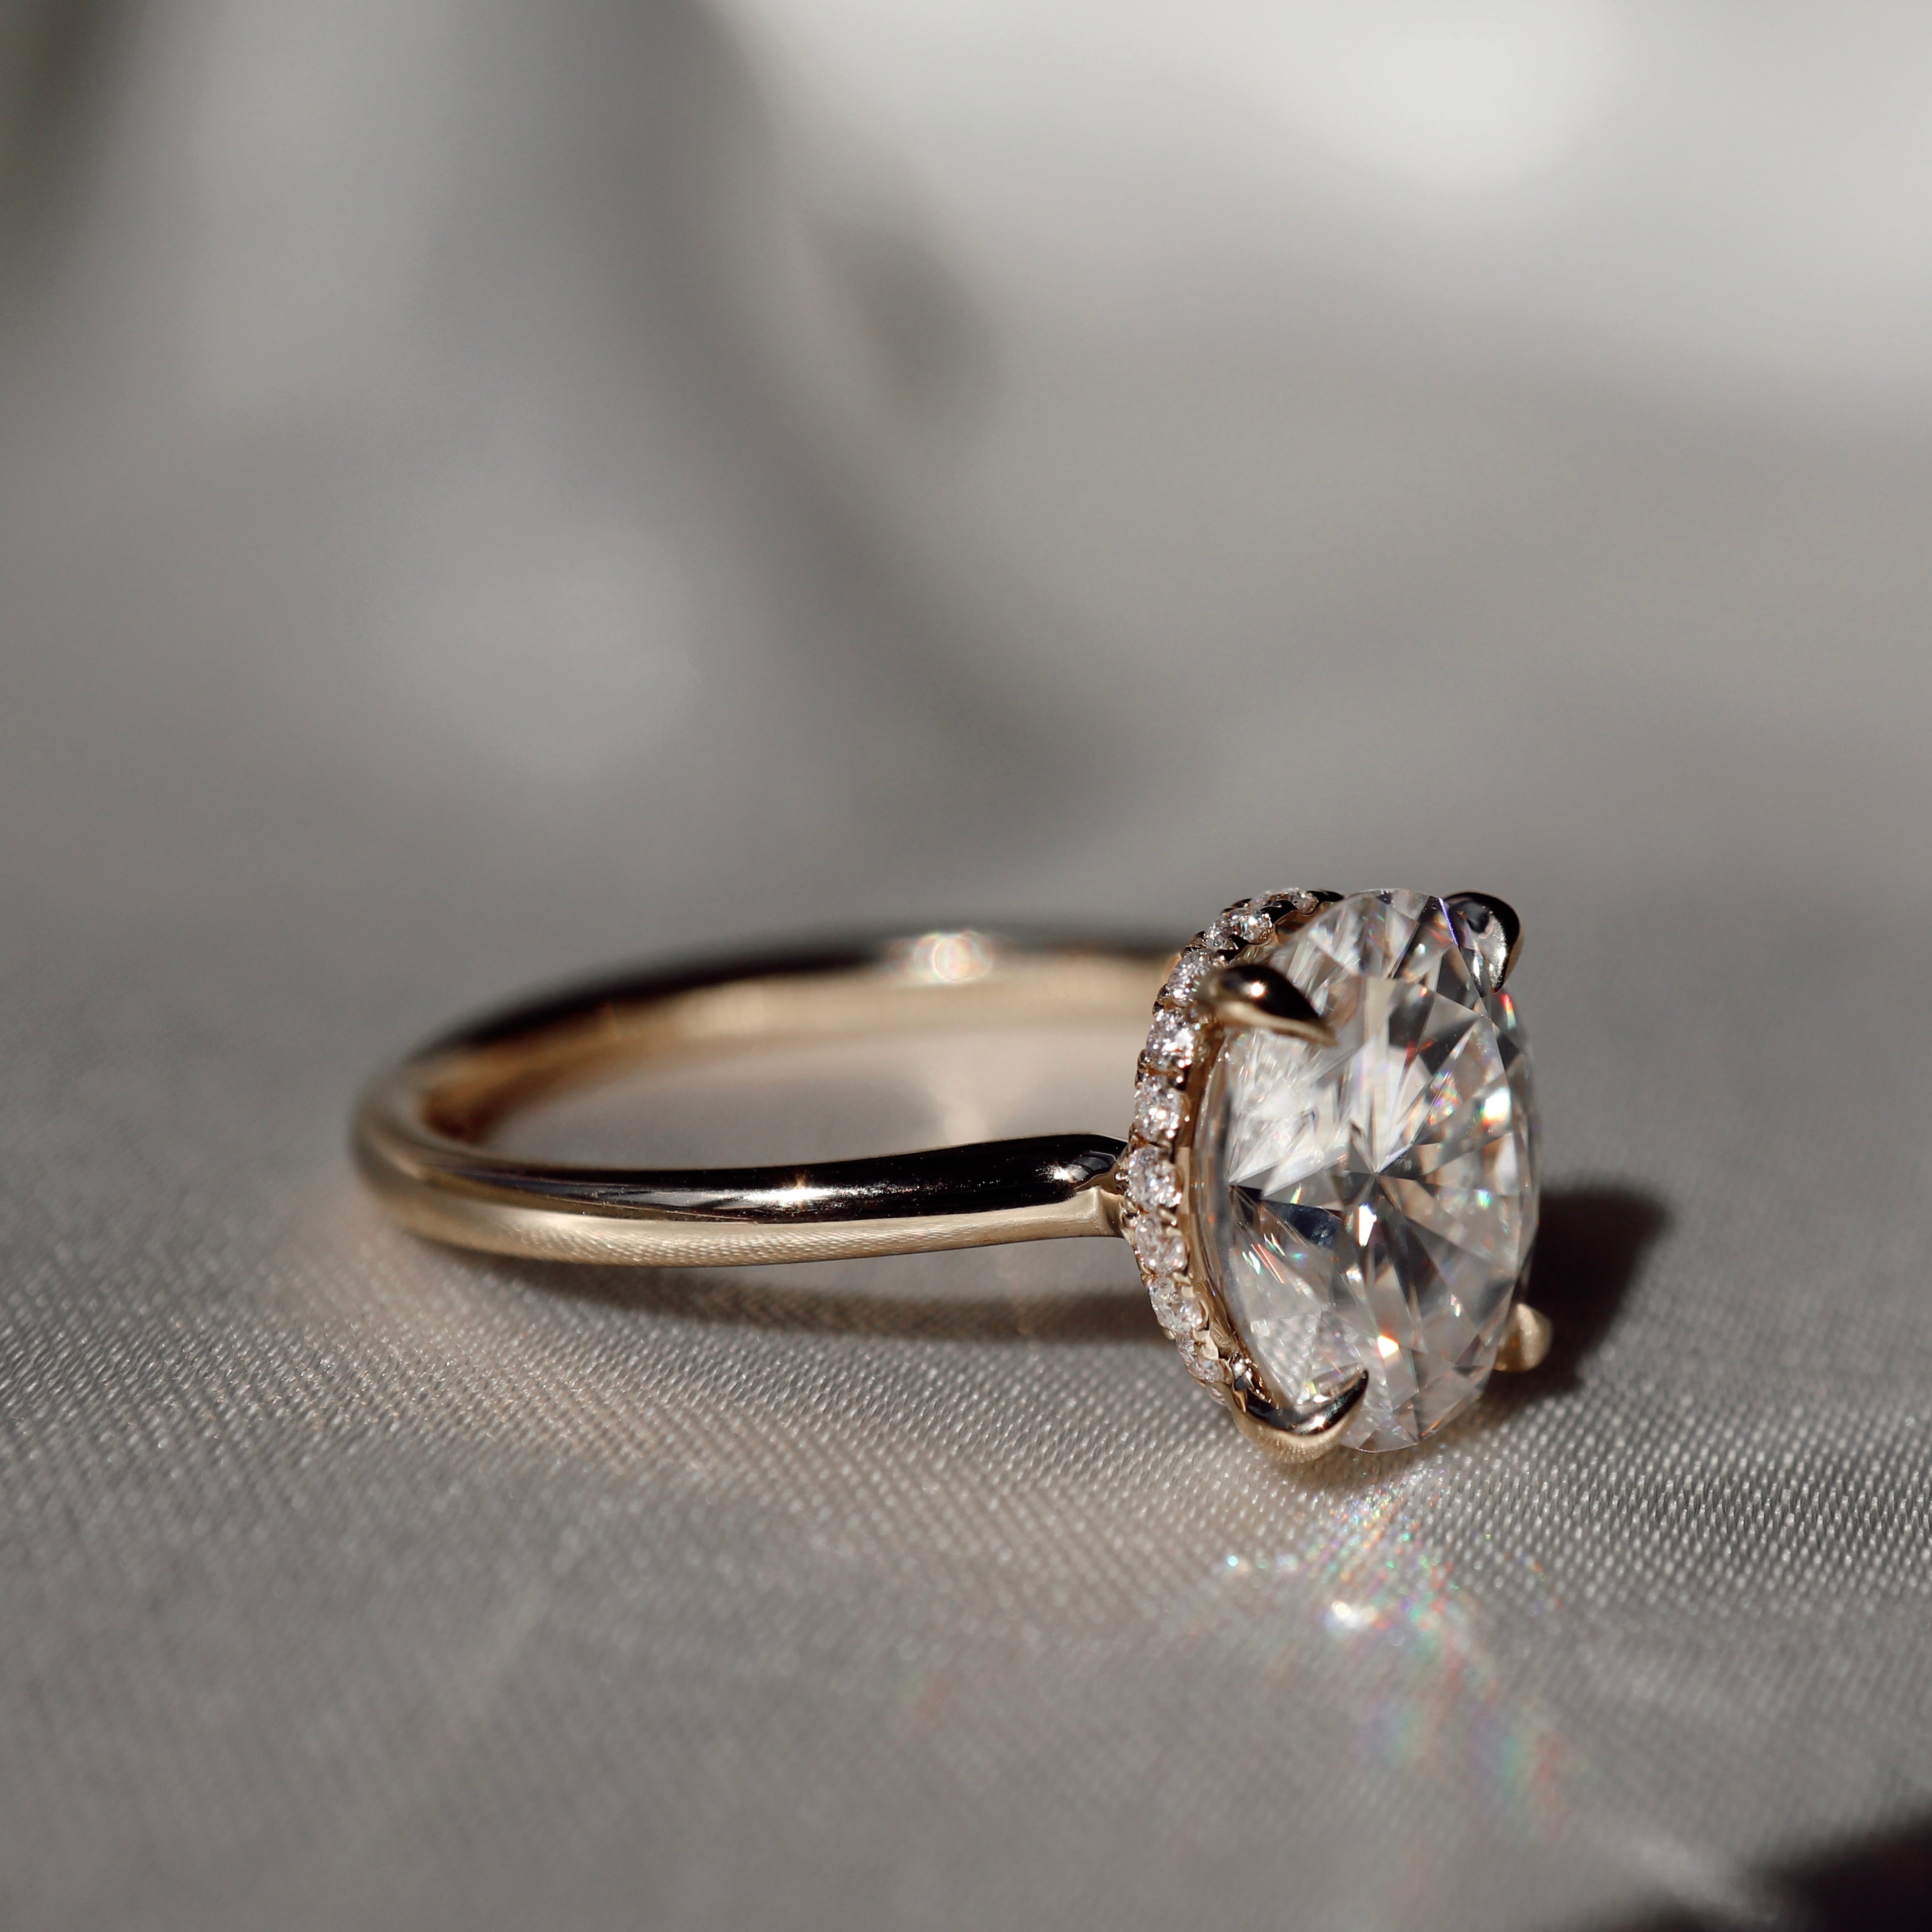 The Luise Ring™ Low Set - Oval Solitaire with Hidden Halo